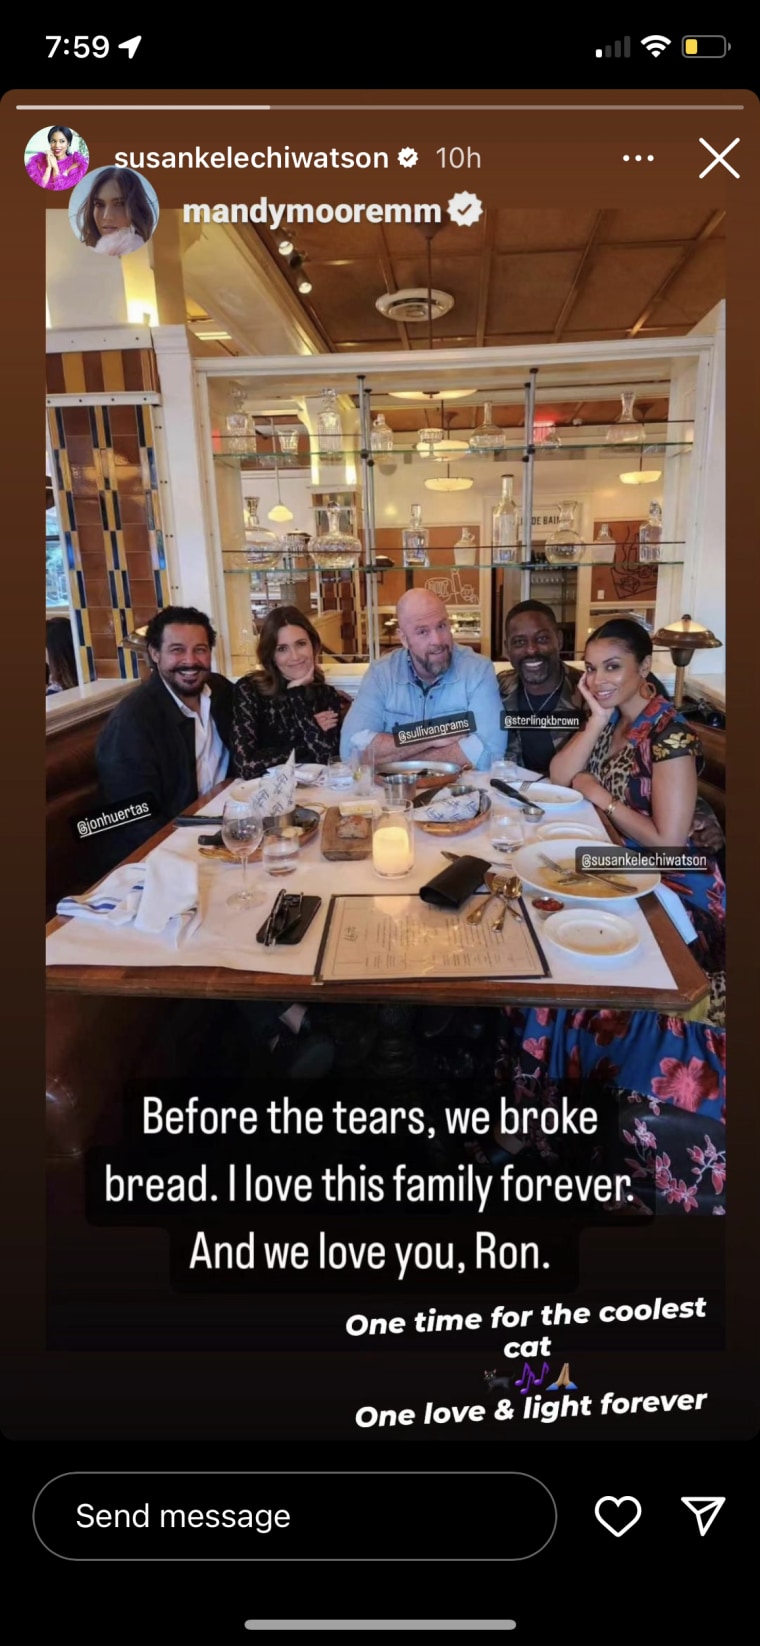 Mandy Moore and Susan Kelechi Watson reposting the photo Chris Sullivan shared on their Instagram story.